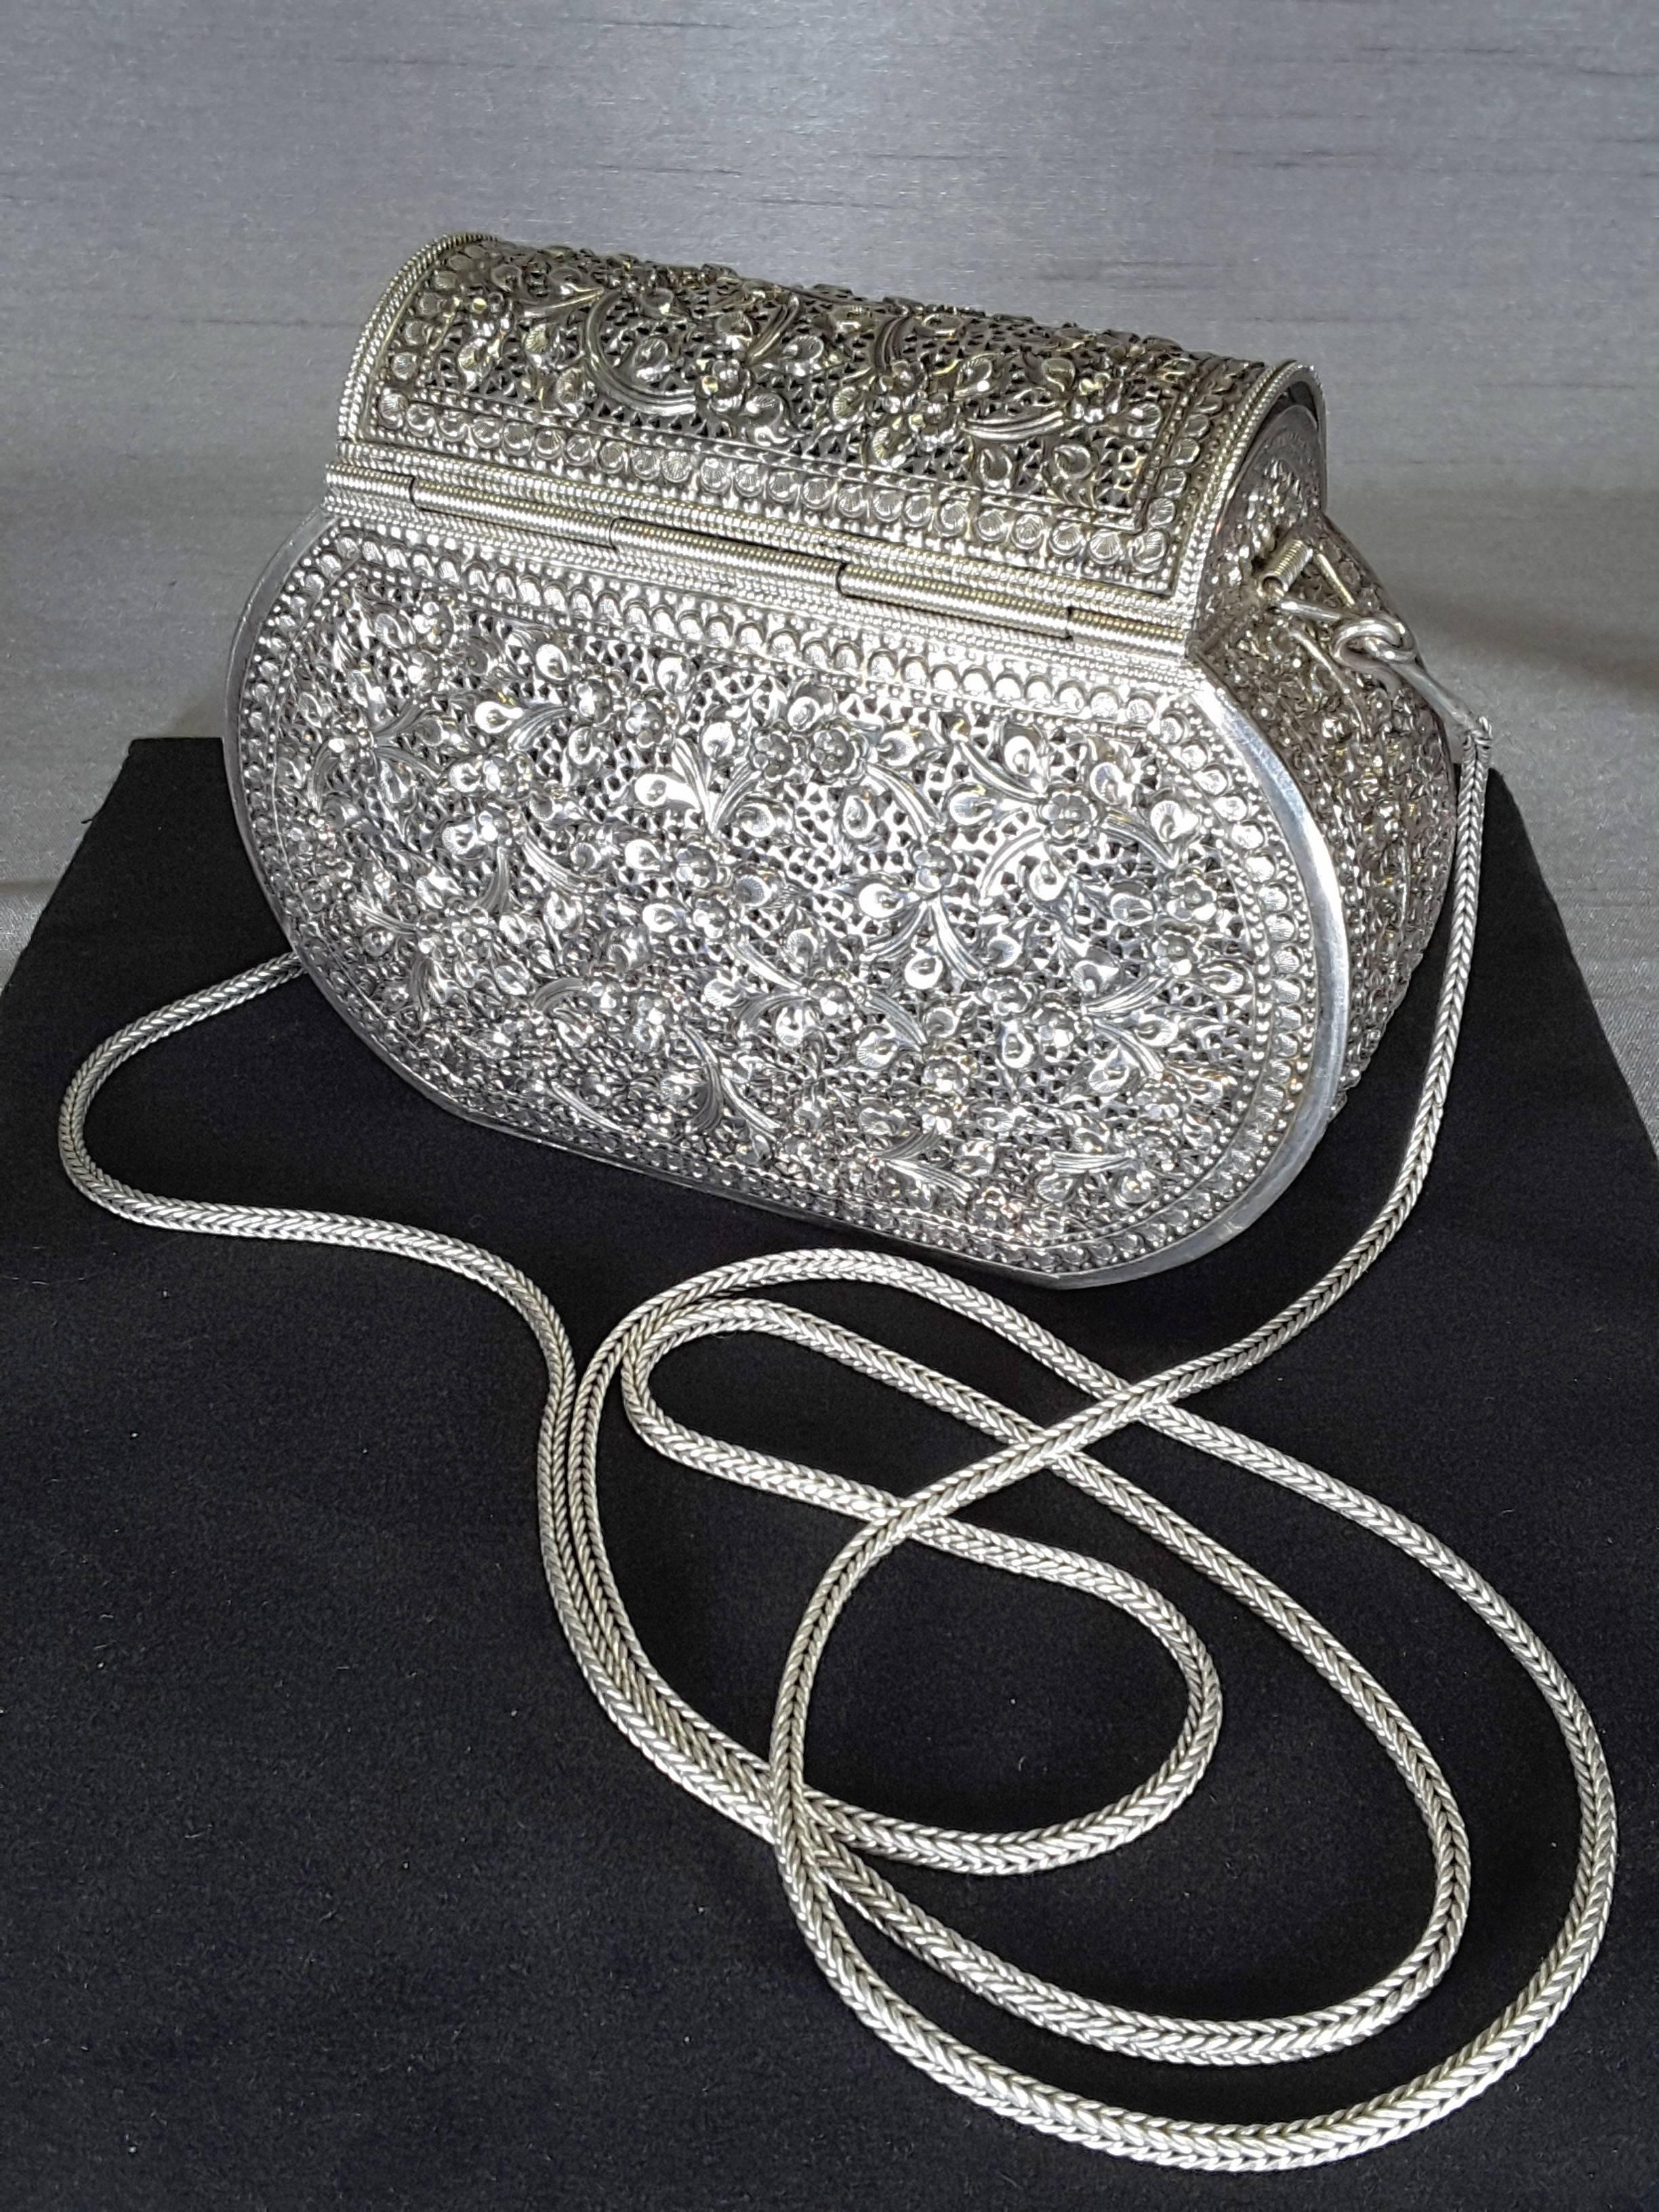 Edwardian Sterling Silver Floral Decorated Evening Purse